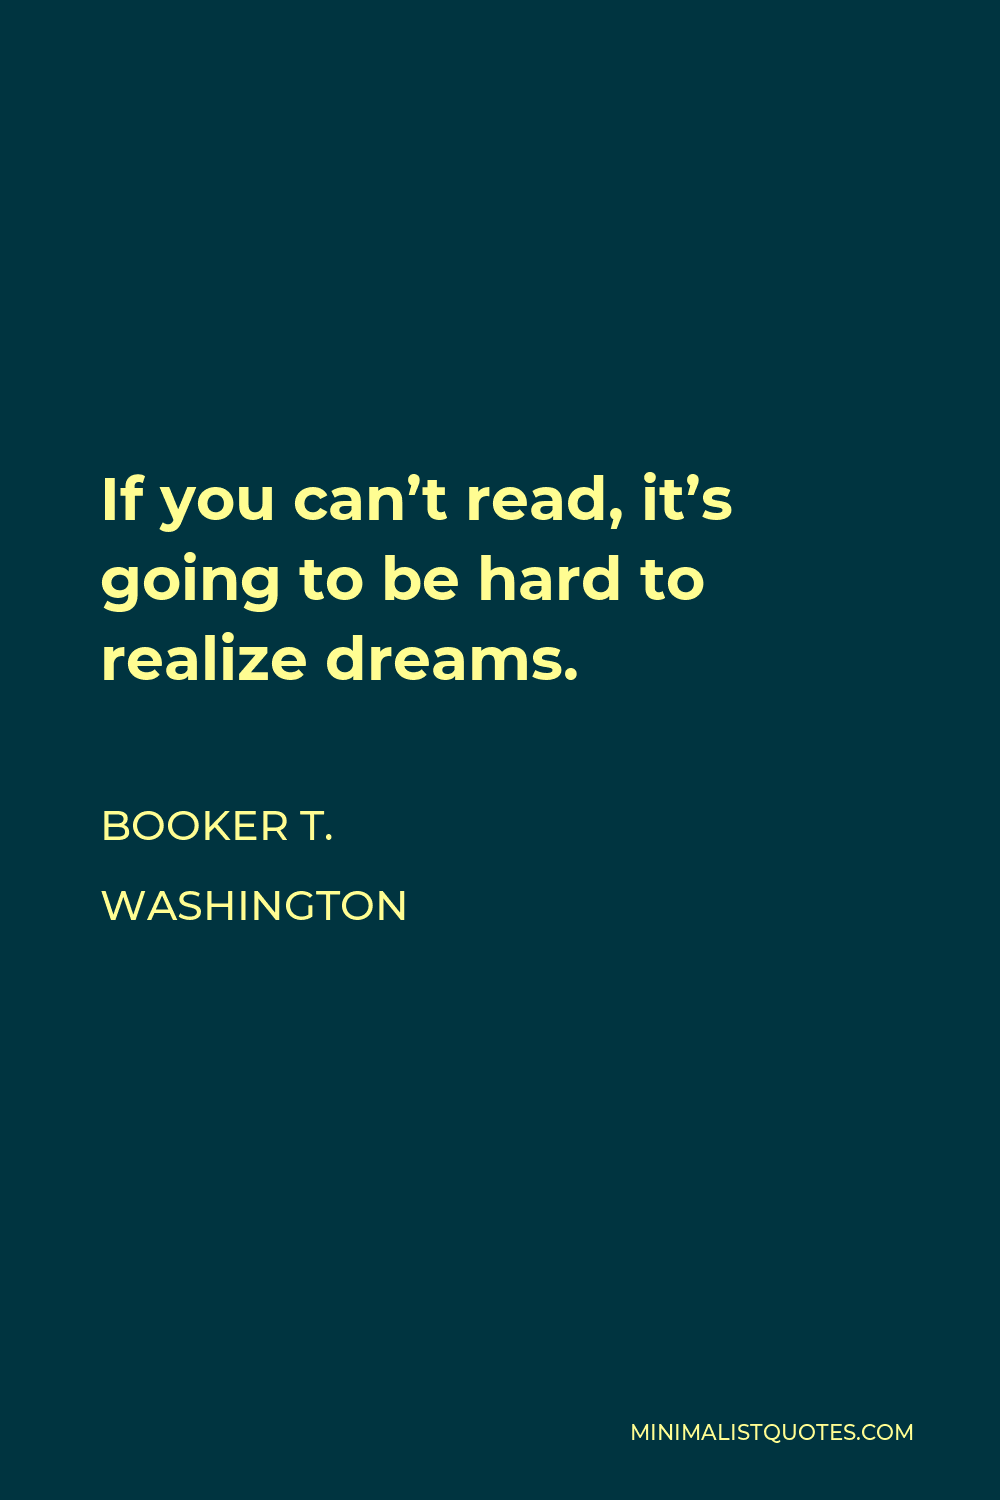 Booker T. Washington Quote - If you can’t read, it’s going to be hard to realize dreams.